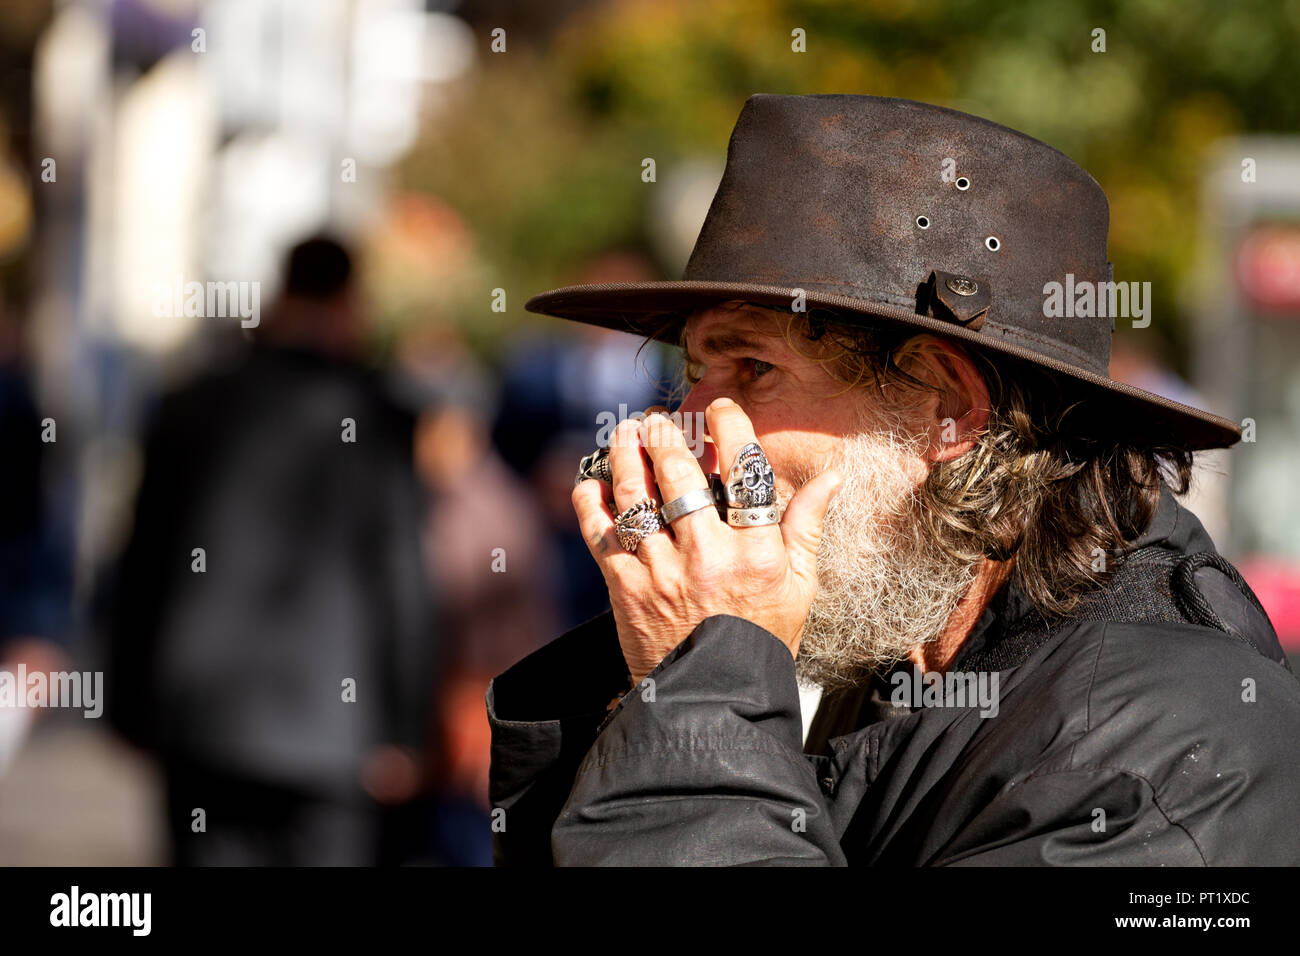 Dundee, Tayside, Scotland, UK. 5th October, 2018. Former X Factor 2017 audition contestant 'Fast Eddie' Lafferty is the harmonica playing busker and well known face on the streets of Dundee, Scotland. Eddie Lafferty has been playing the harmonica since he was 7 years old, nearly 50 years. This is Fast Eddie performing today and the streets are his stage. Credit: Dundee Photographics / Alamy Live News Stock Photo